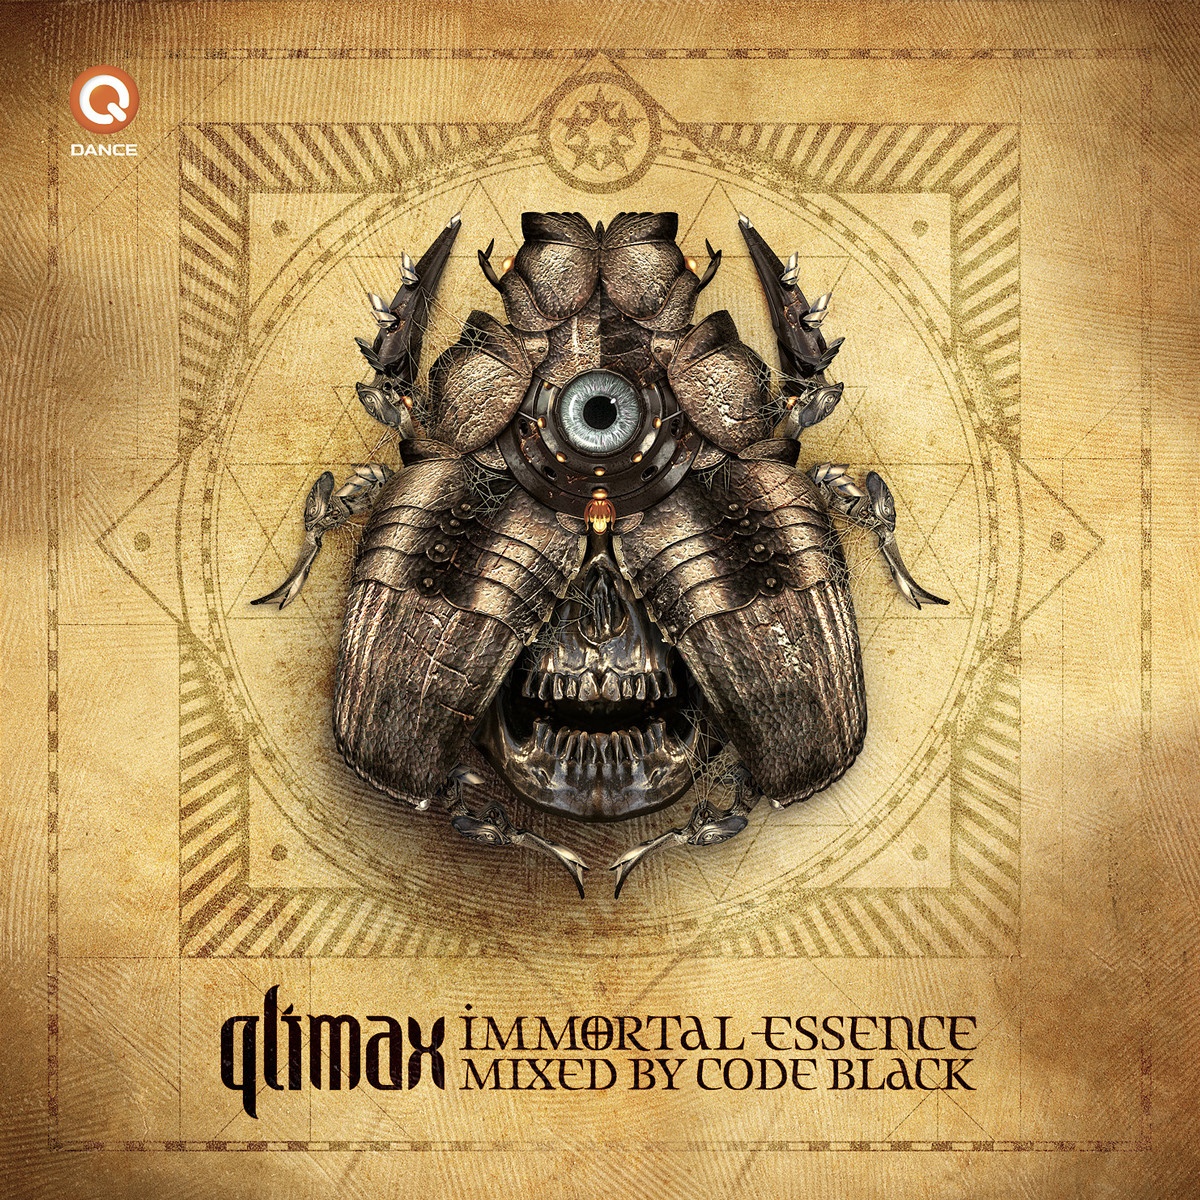 Qlimax 2013 Immortal Essence Mixed By Code Black  